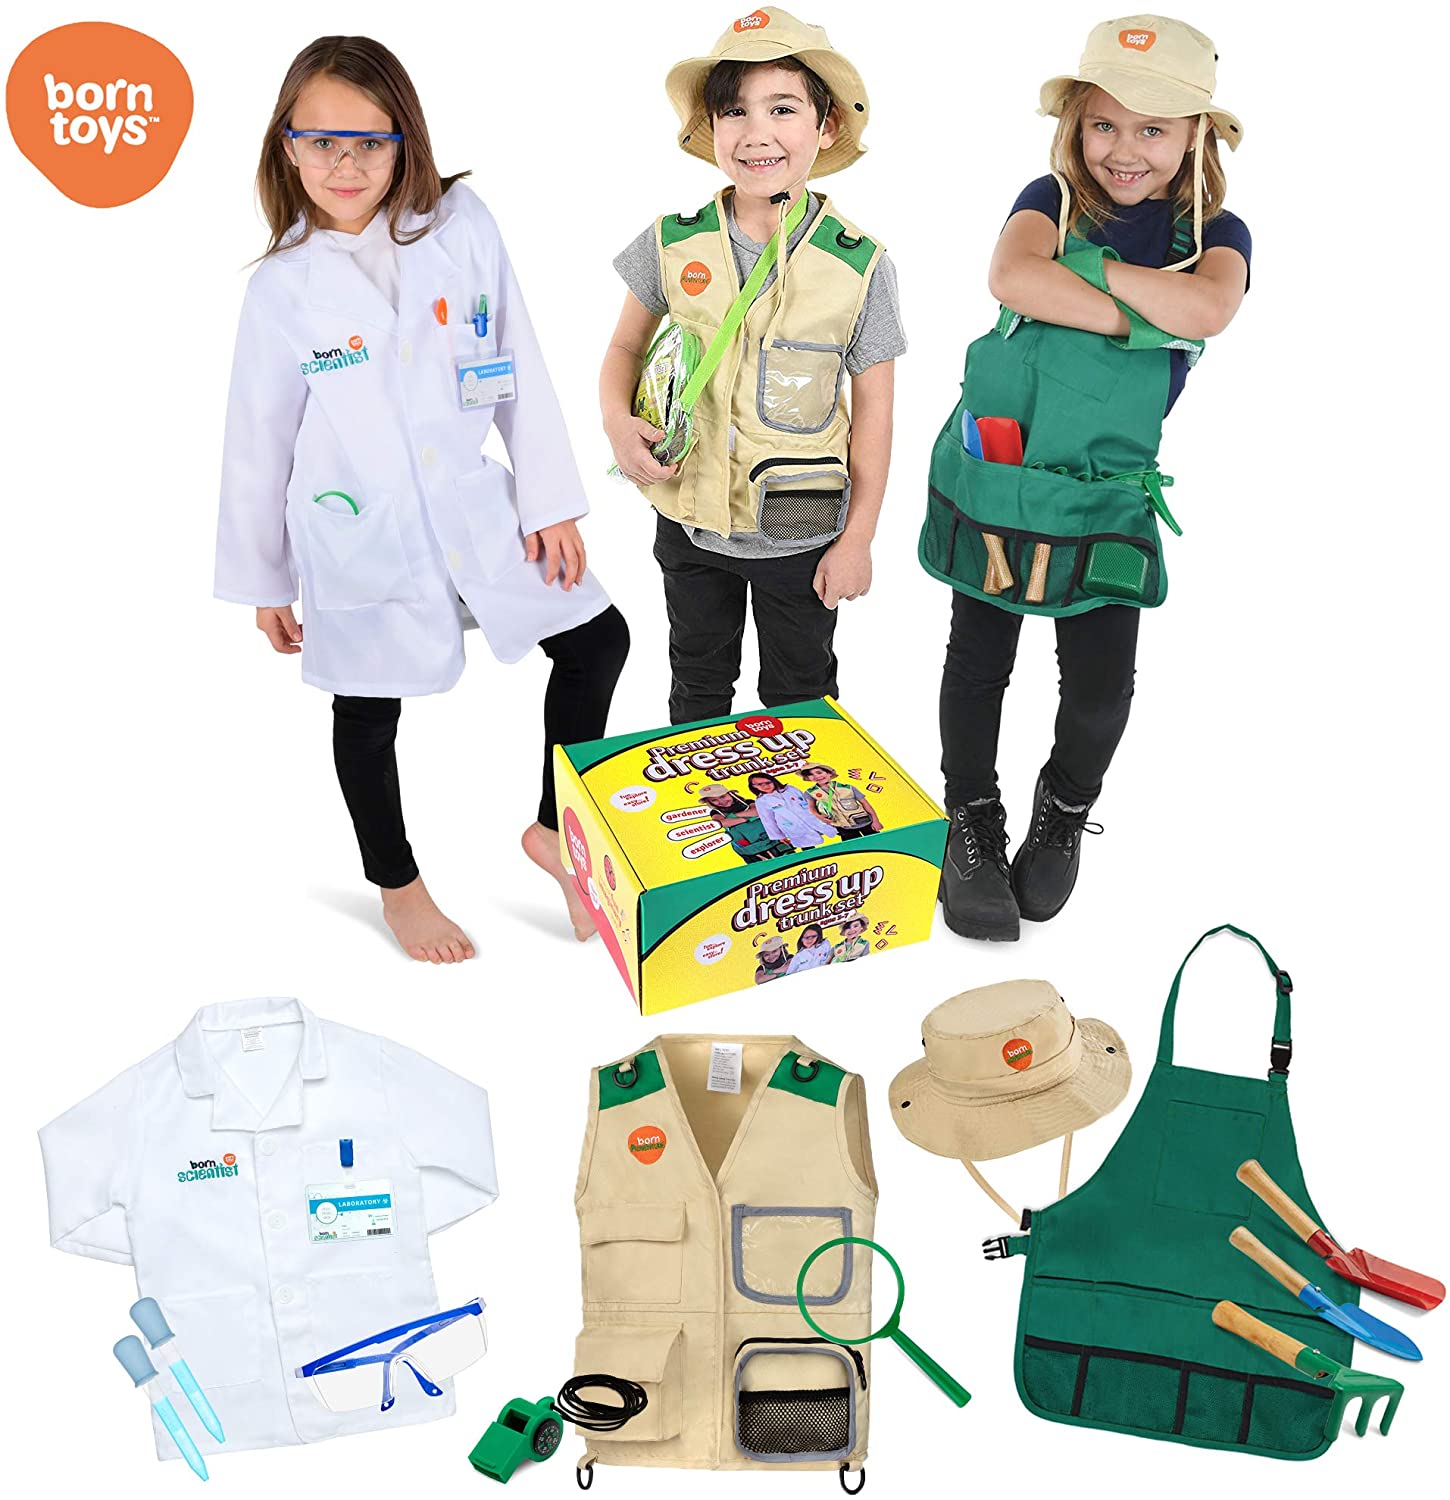 Born Toys Deluxe Premium Washable Hero and Dress up Trunk Set Bundle  Includes Fireman,Policeman,Doctor,Construction worker,Gardener,Chef  Costumes for